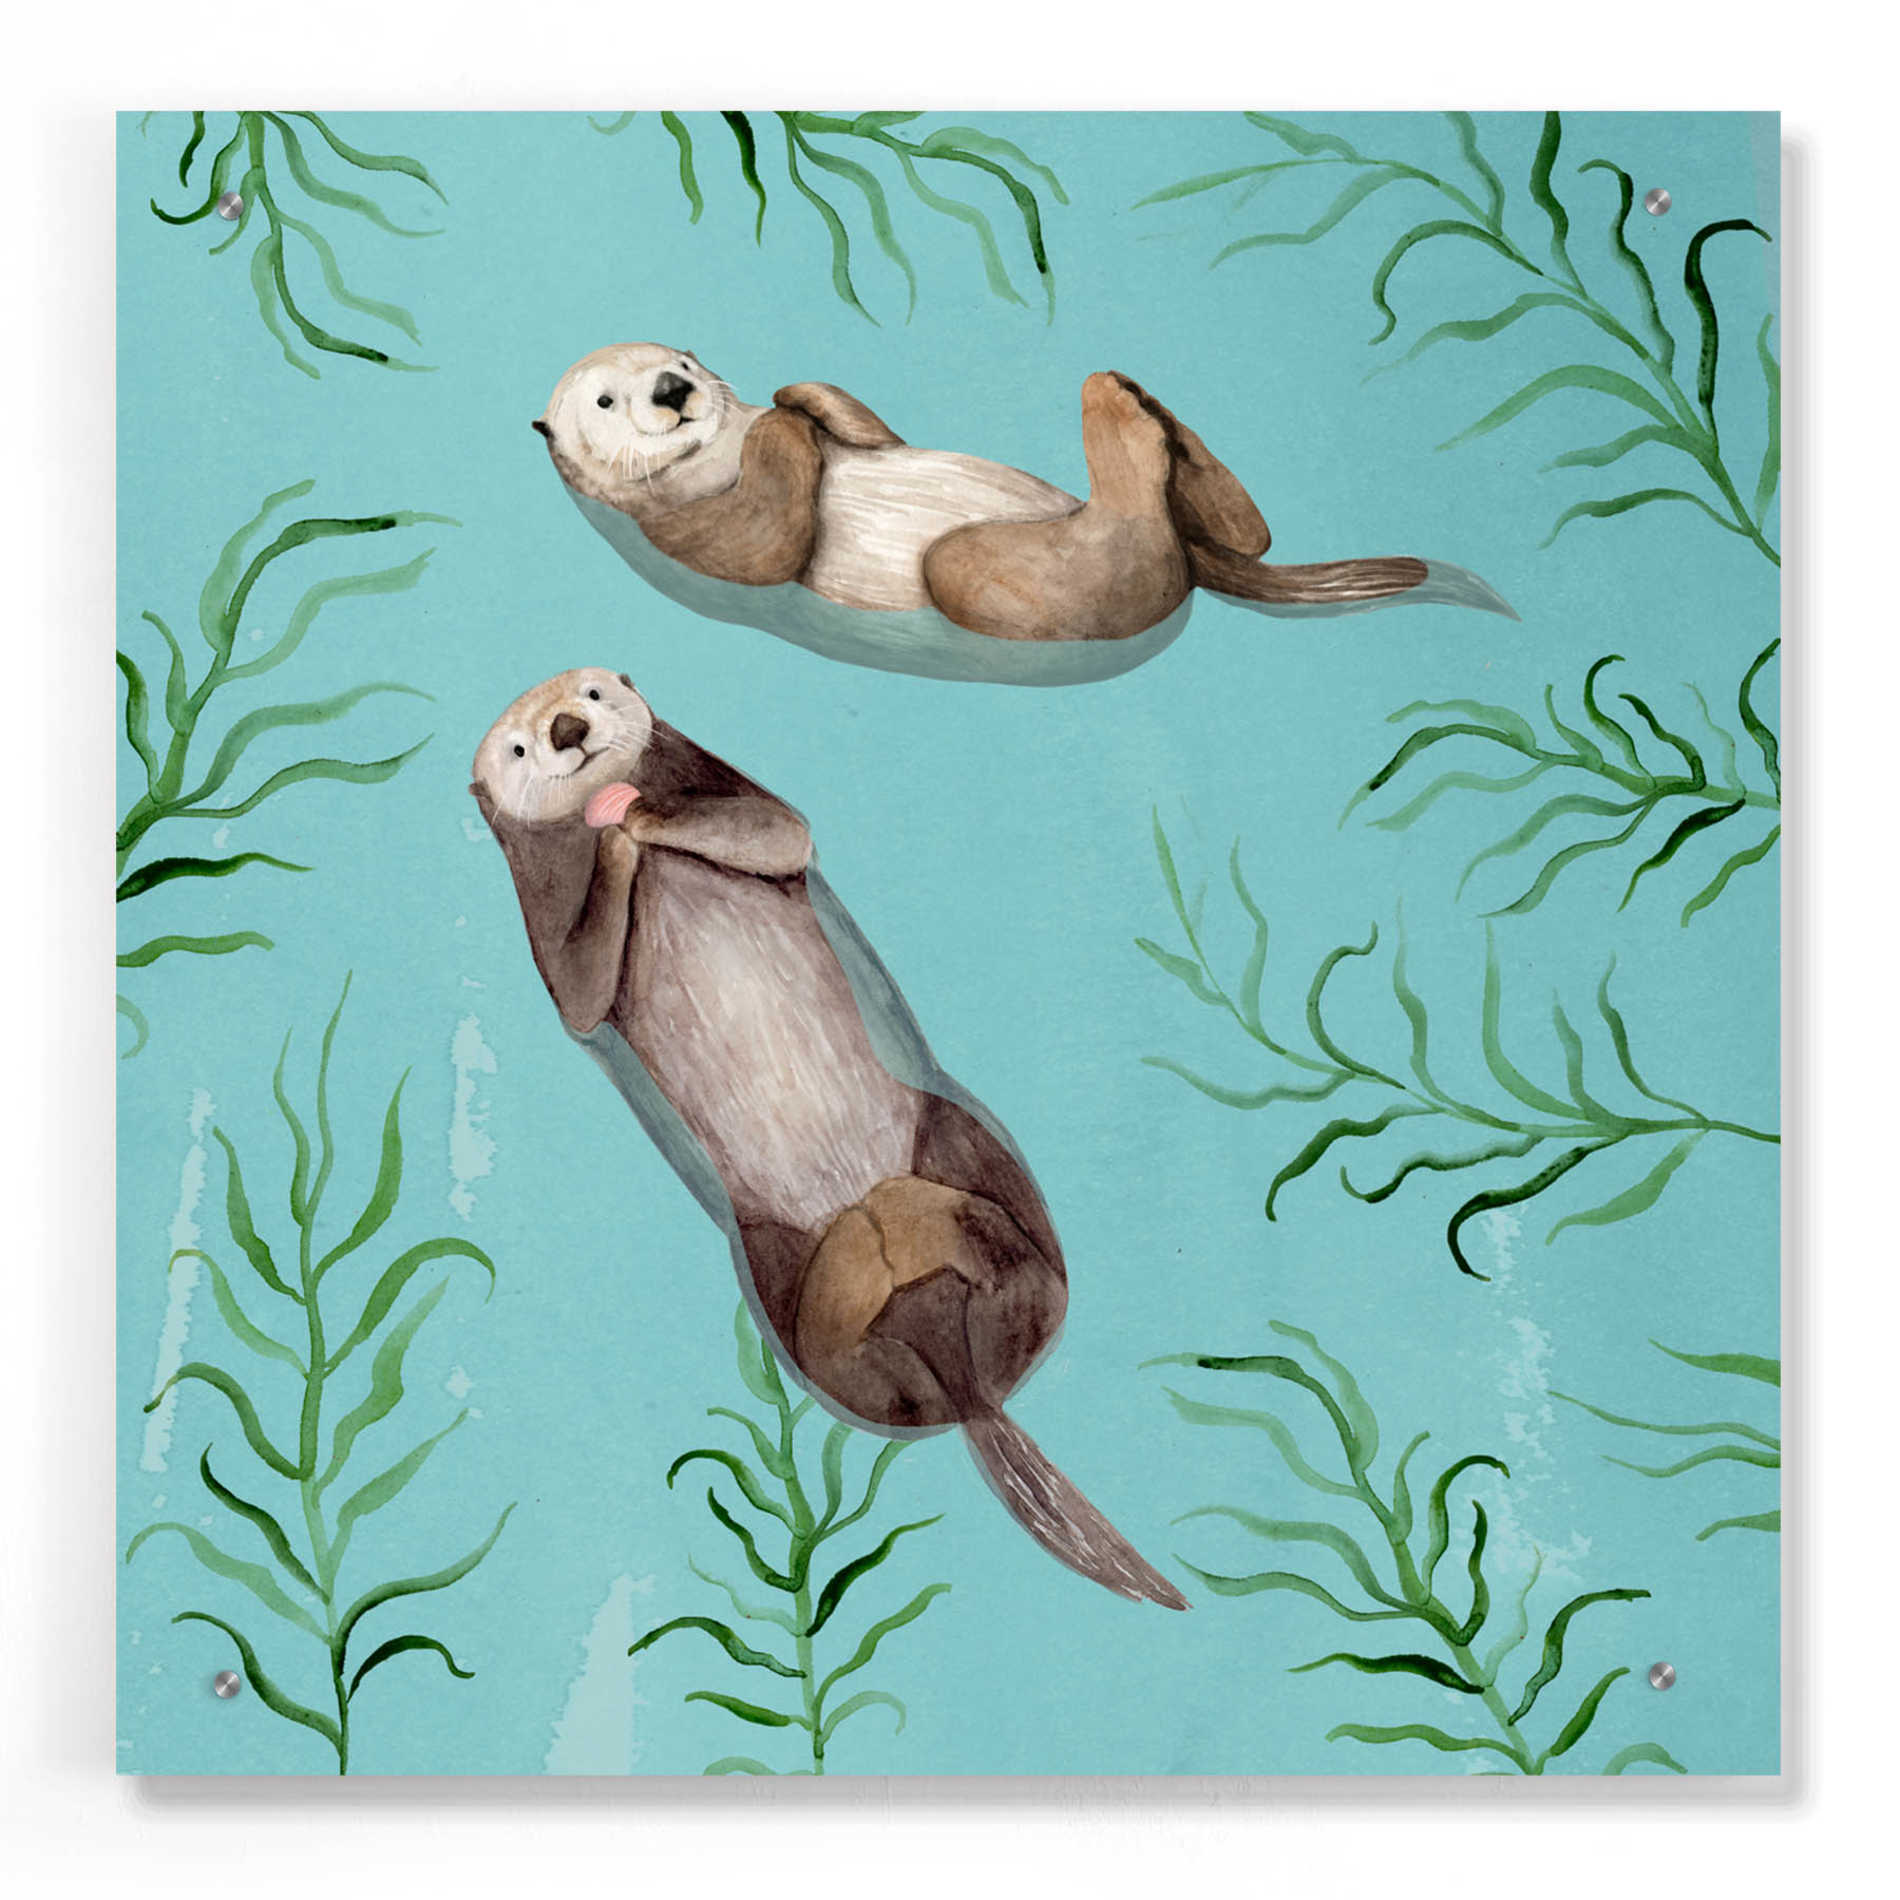 Epic Art 'Otter's Paradise IV' by Victoria Borges, Acrylic Glass Wall Art,24x24